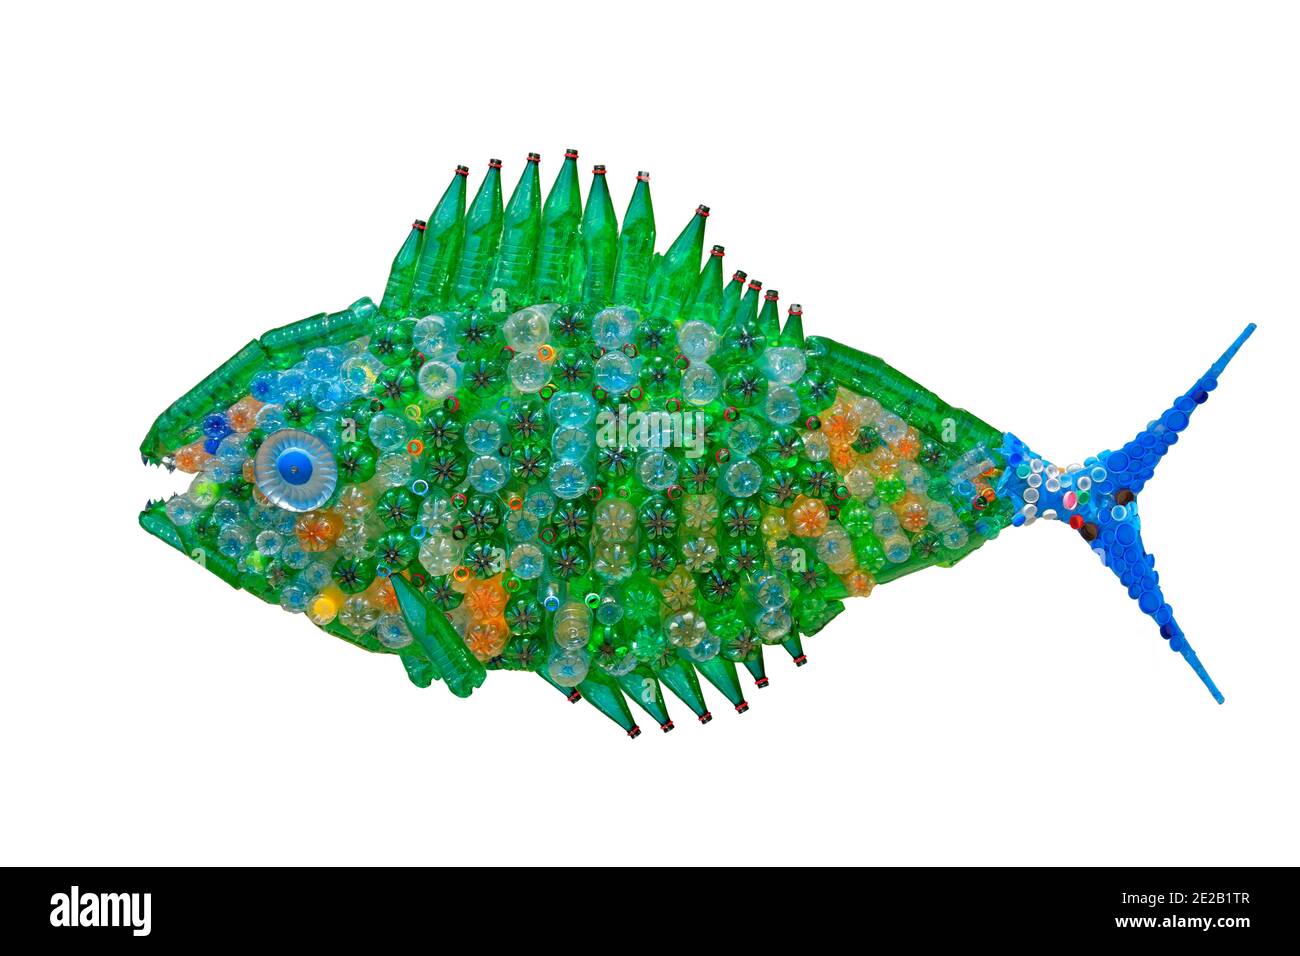 Fish feature created from plastic waste to illustrate pollution in the marine environment. Stock Photo